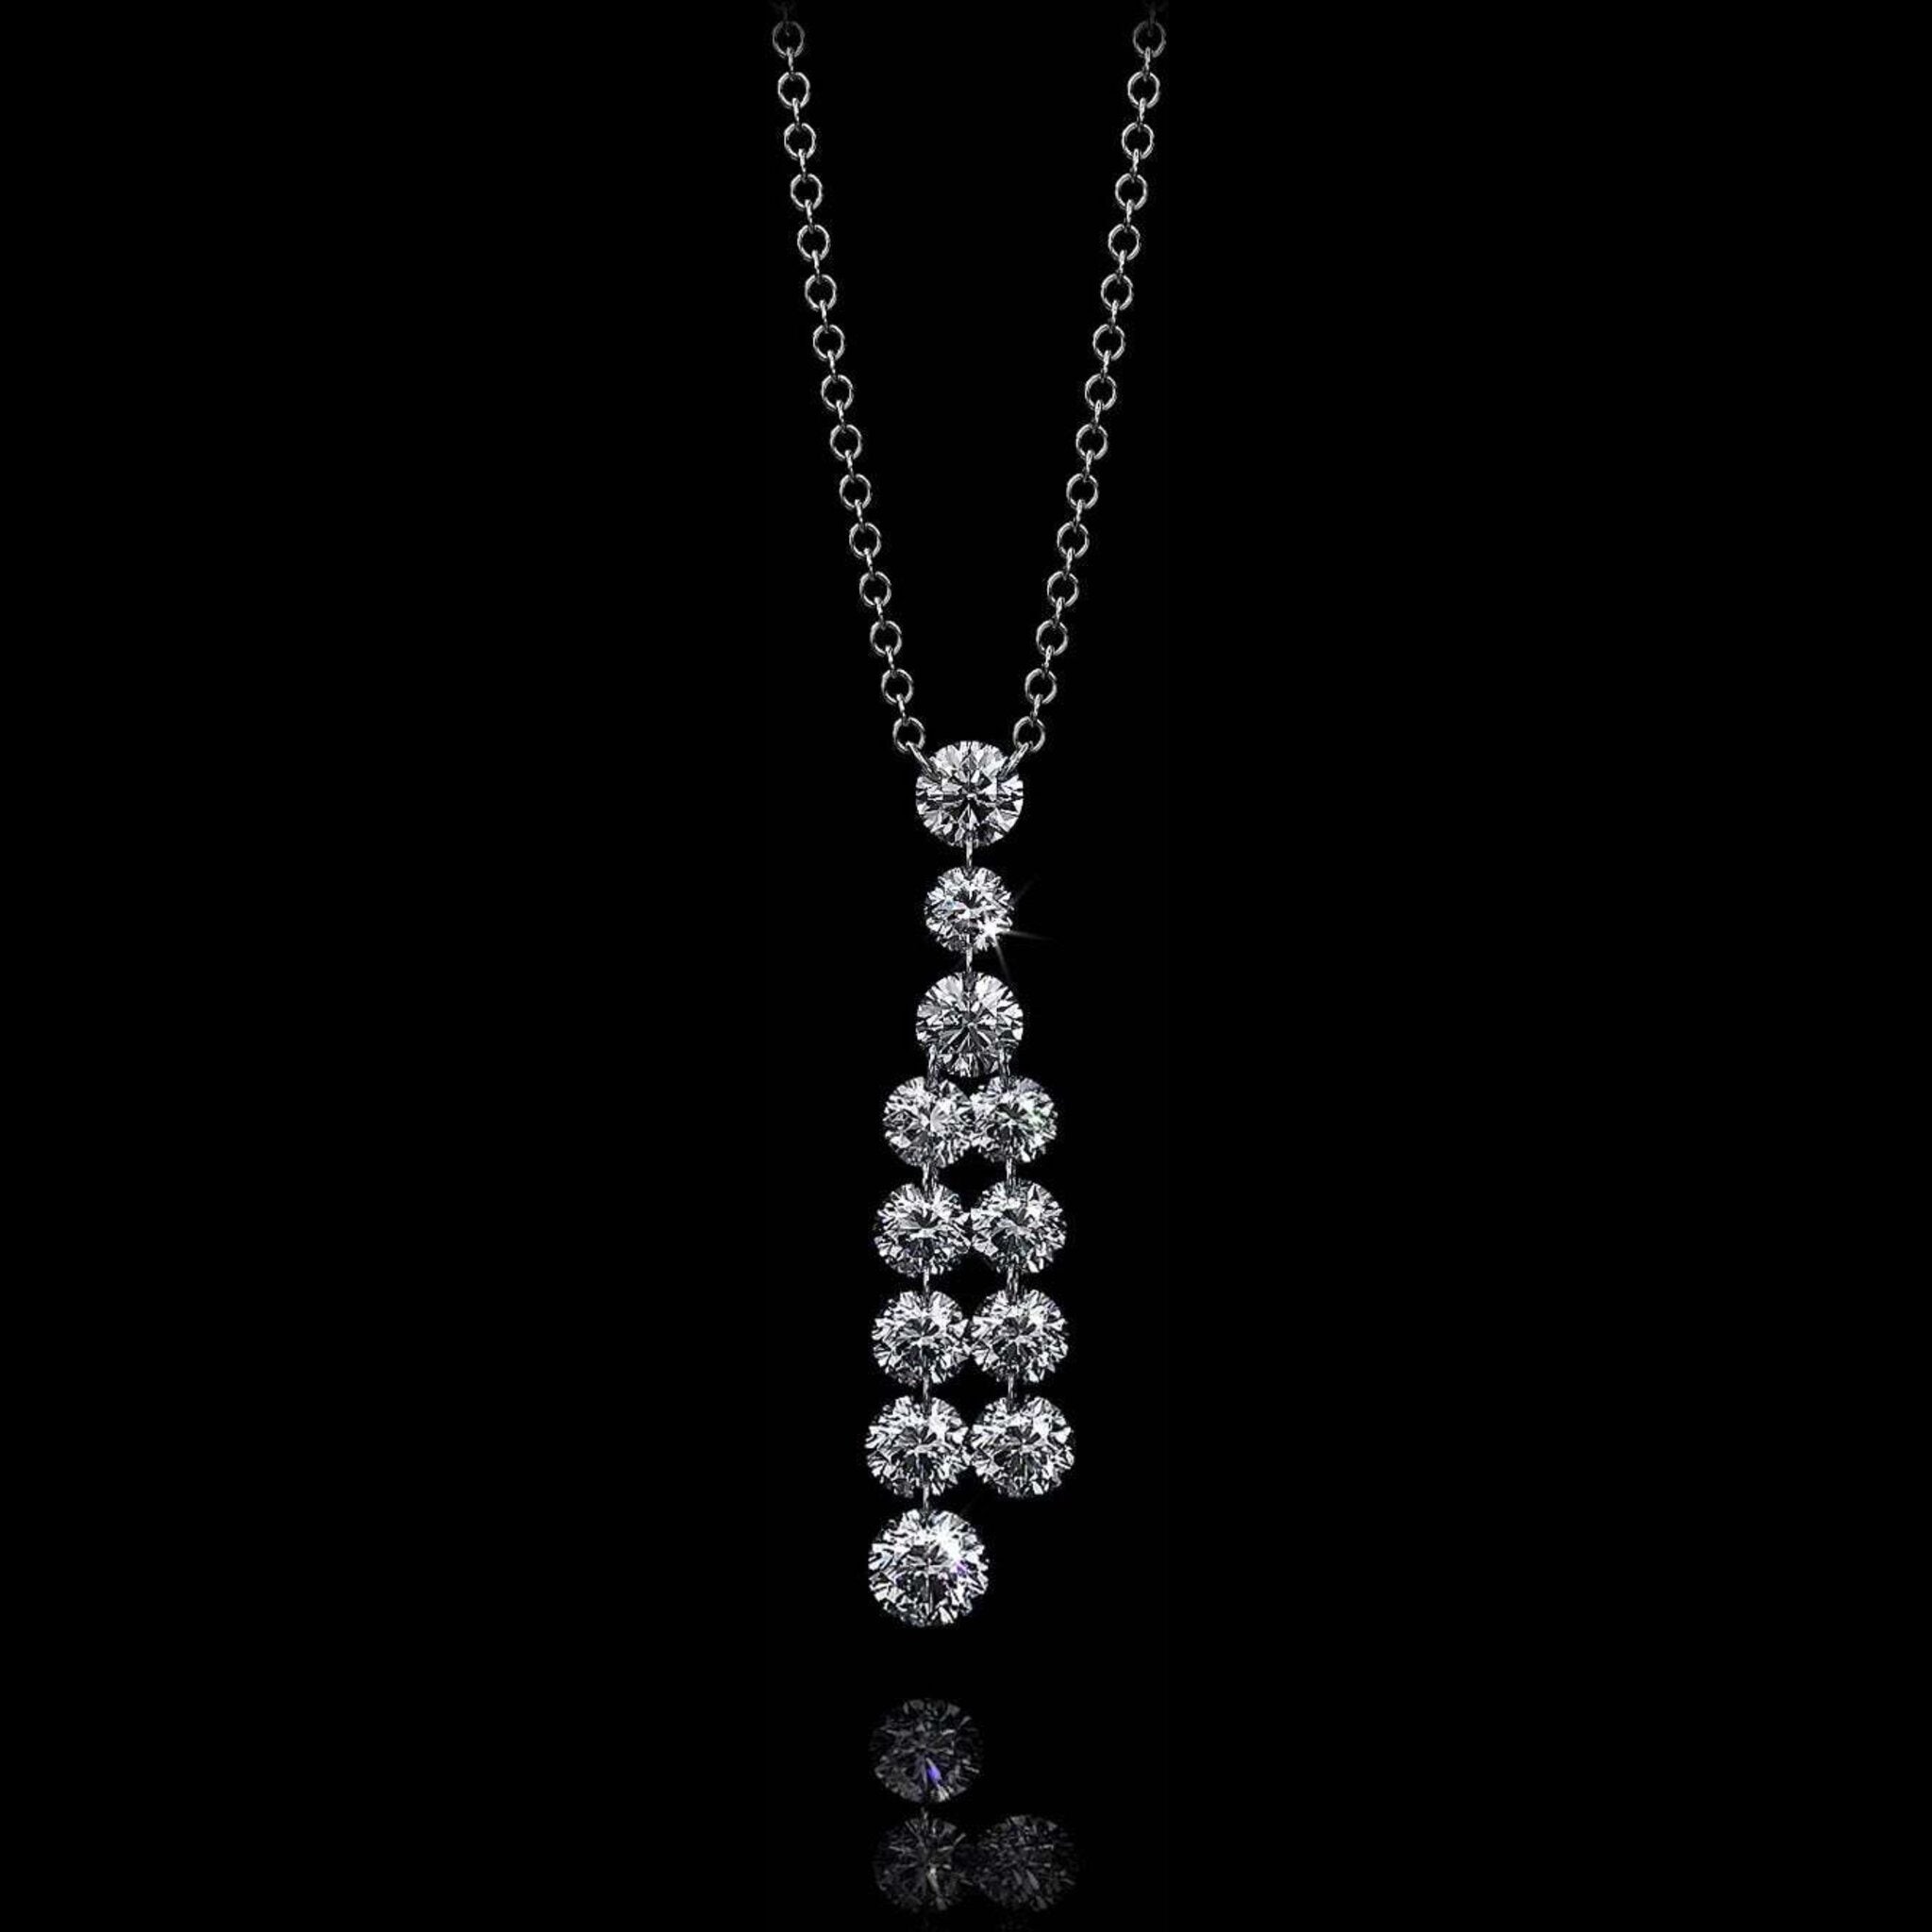 Aresa New York - Lorde Tassel Necklaces - 18K White Gold with 1.60 cts. of Diamonds